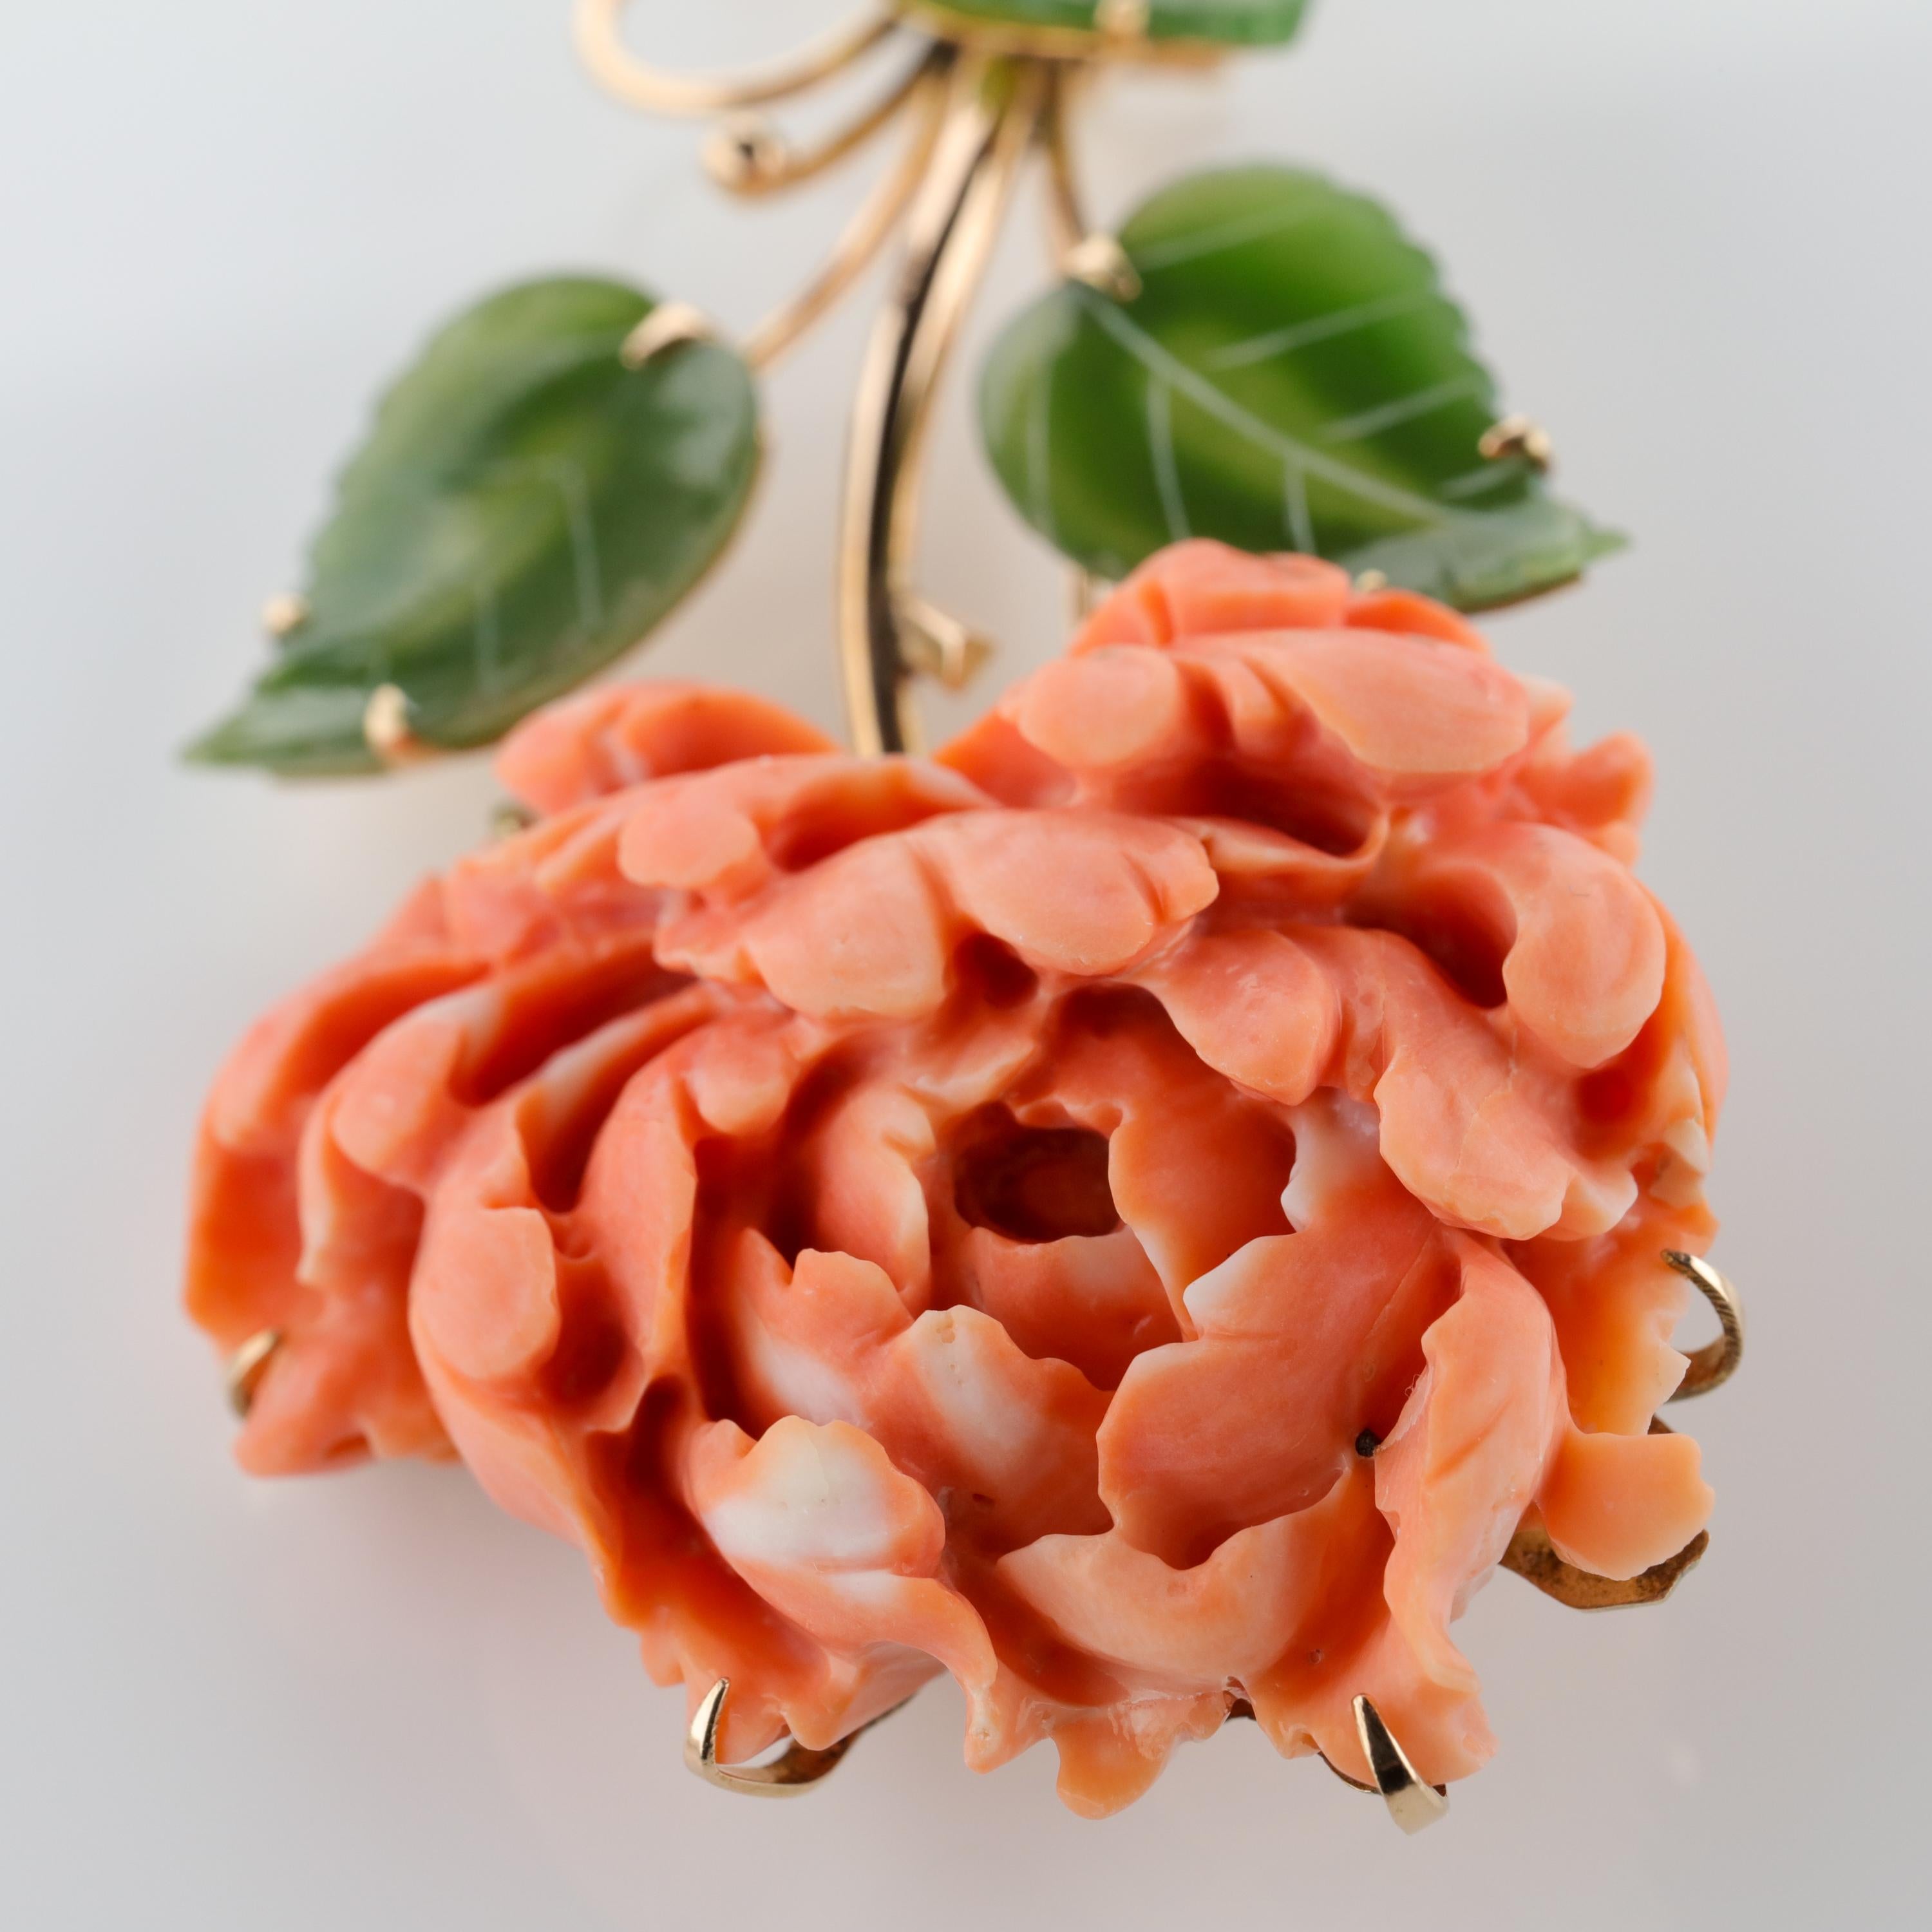 This spectacular and unique brooch features a hand-carved coral chrysanthemum blossom executed with such skill and artistry that if you lay the brooch on a table, look away from it, then look back at it, it will completely fook your eye. It looks